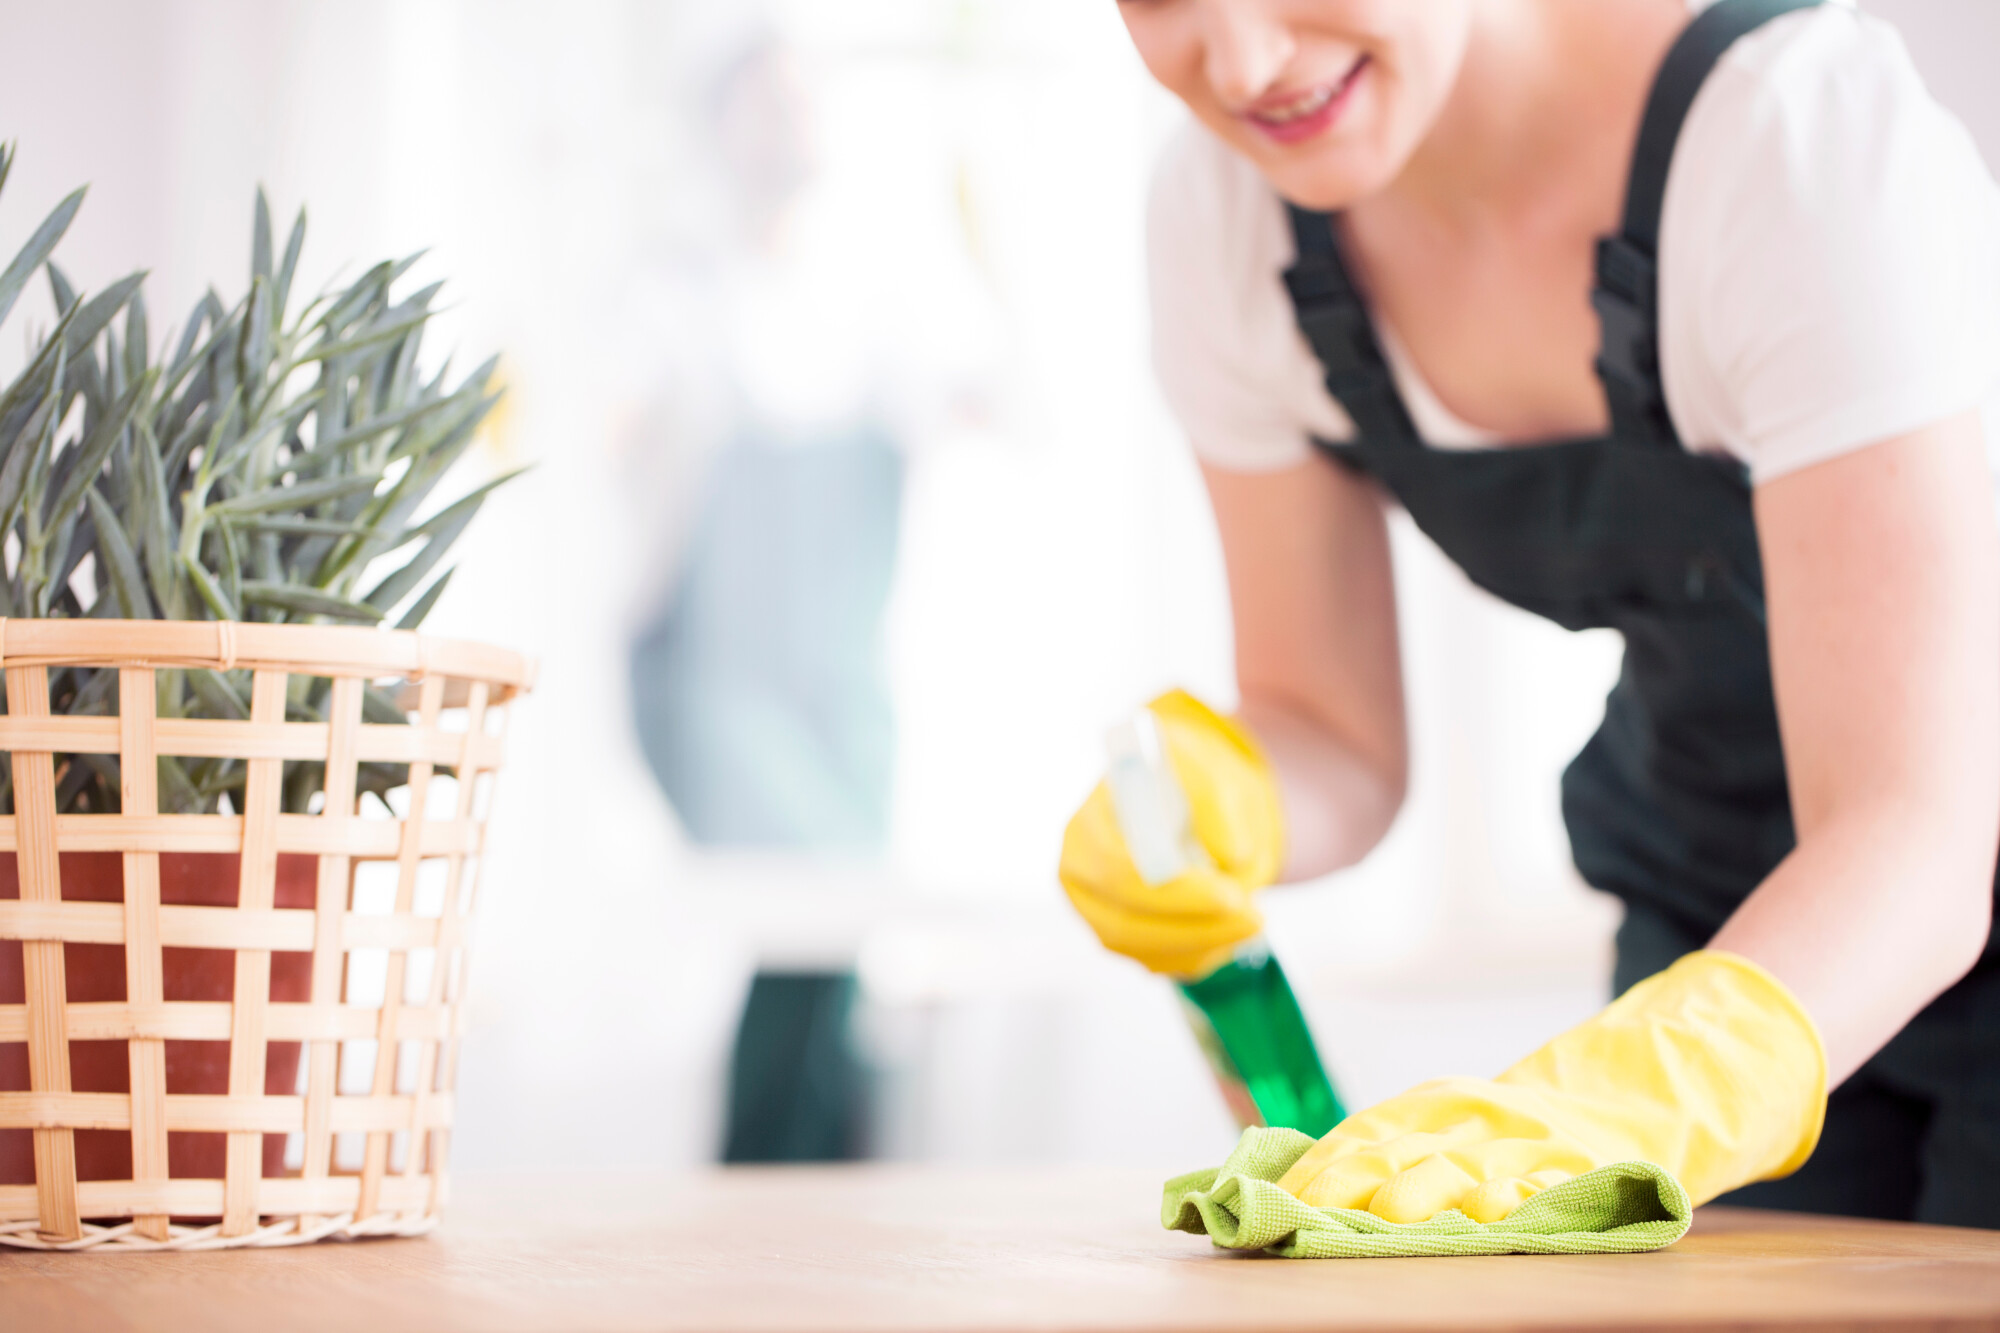 If you're thinking about giving your home a deep clean, you may want to hire a residential cleaning service. Keep reading for a list of benefits if you do.